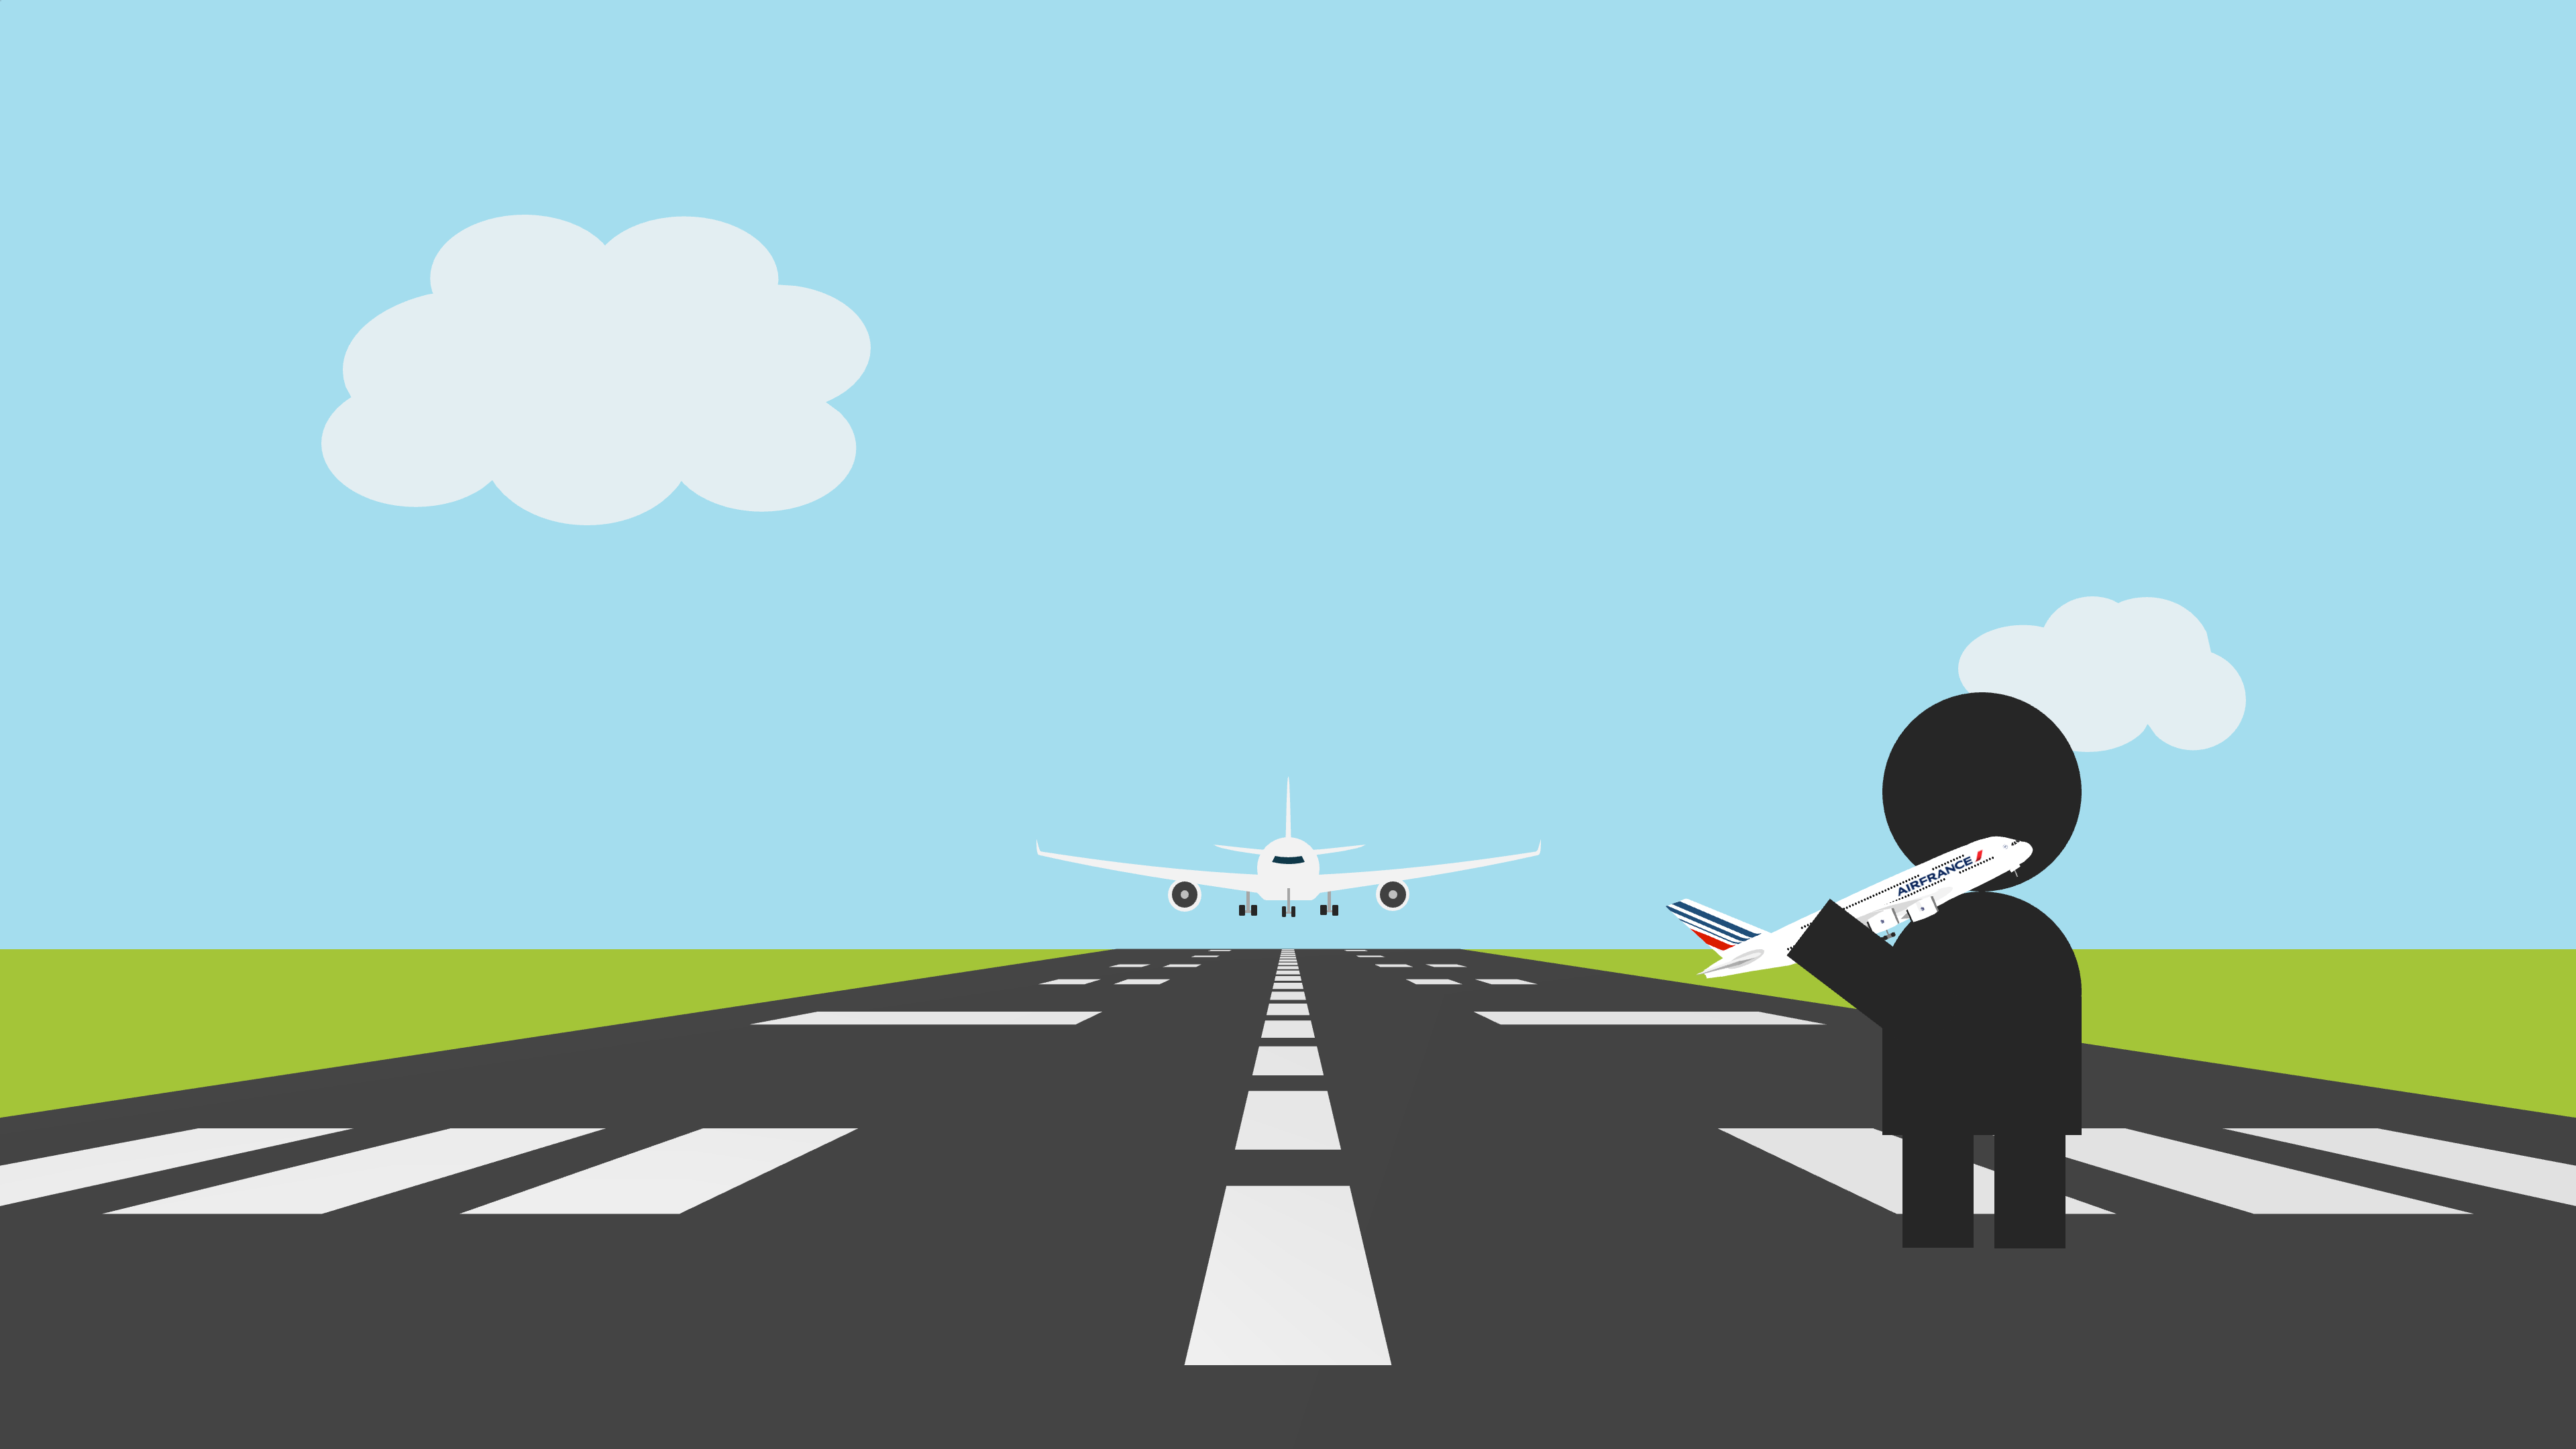 A person holds a model aeroplane while standing on a runway. A descending plane can be seen in the distance.
